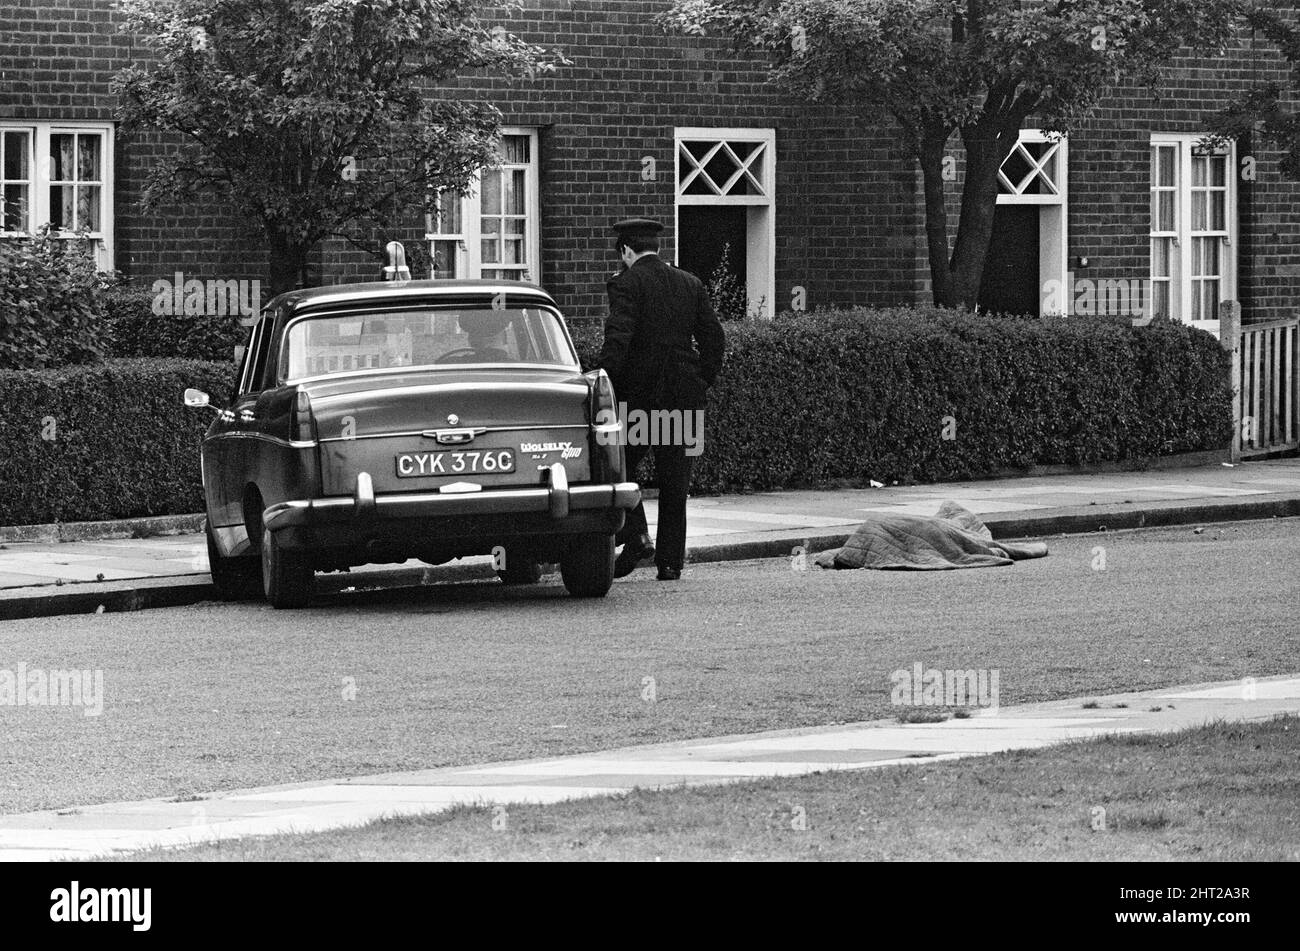 Three police officers, Detective Sergeant Christopher Tippett Head, 30, Temporary Detective Constable David Bertram Wombwell, 25 and Police Constable Geoffrey Roger Fox, 41, were shot dead after investigating a battered blue Standard Vanguard estate van parked in Braybrook Street with three men sitting inside it. Harry Roberts, John Edward 'Jack' Witney and John Duddy were convicted of their murder. The scene in Braybrook Street after the murders, a body lies beside the officer's Triumph car. 12th August 1966. Stock Photo